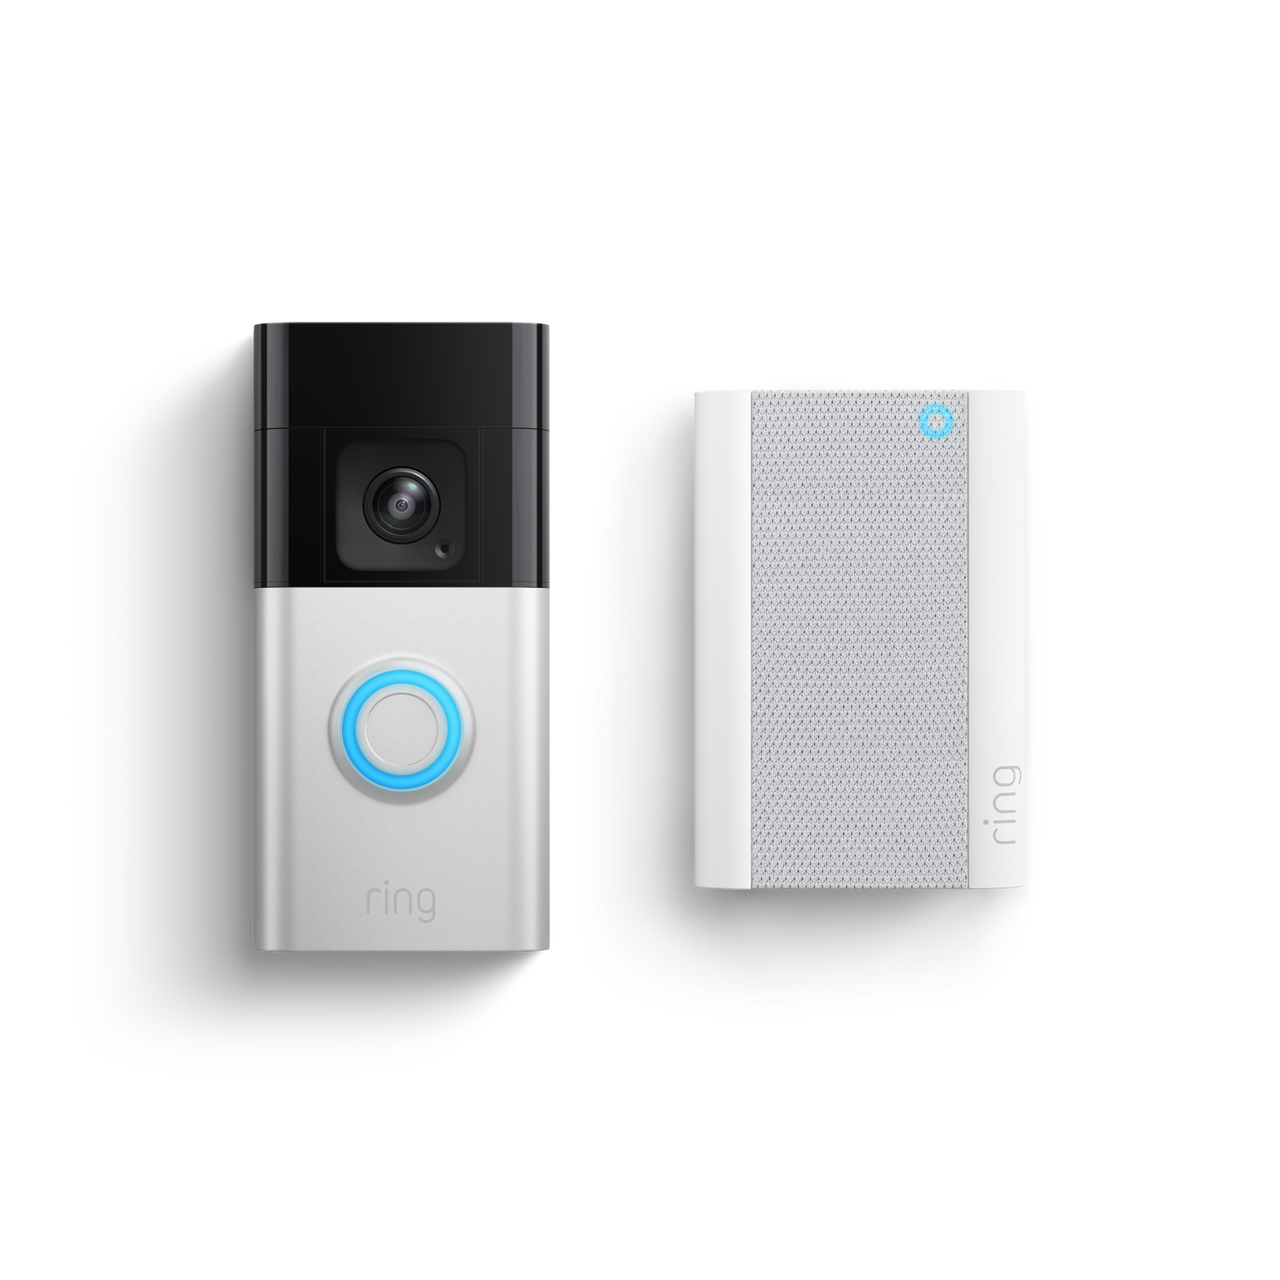 files/ring_battery-video-doorbell-pro_chime-pro_sb_slate1_en_1500x1500_c1a7779d-e7da-4514-948d-252d5535424d.png